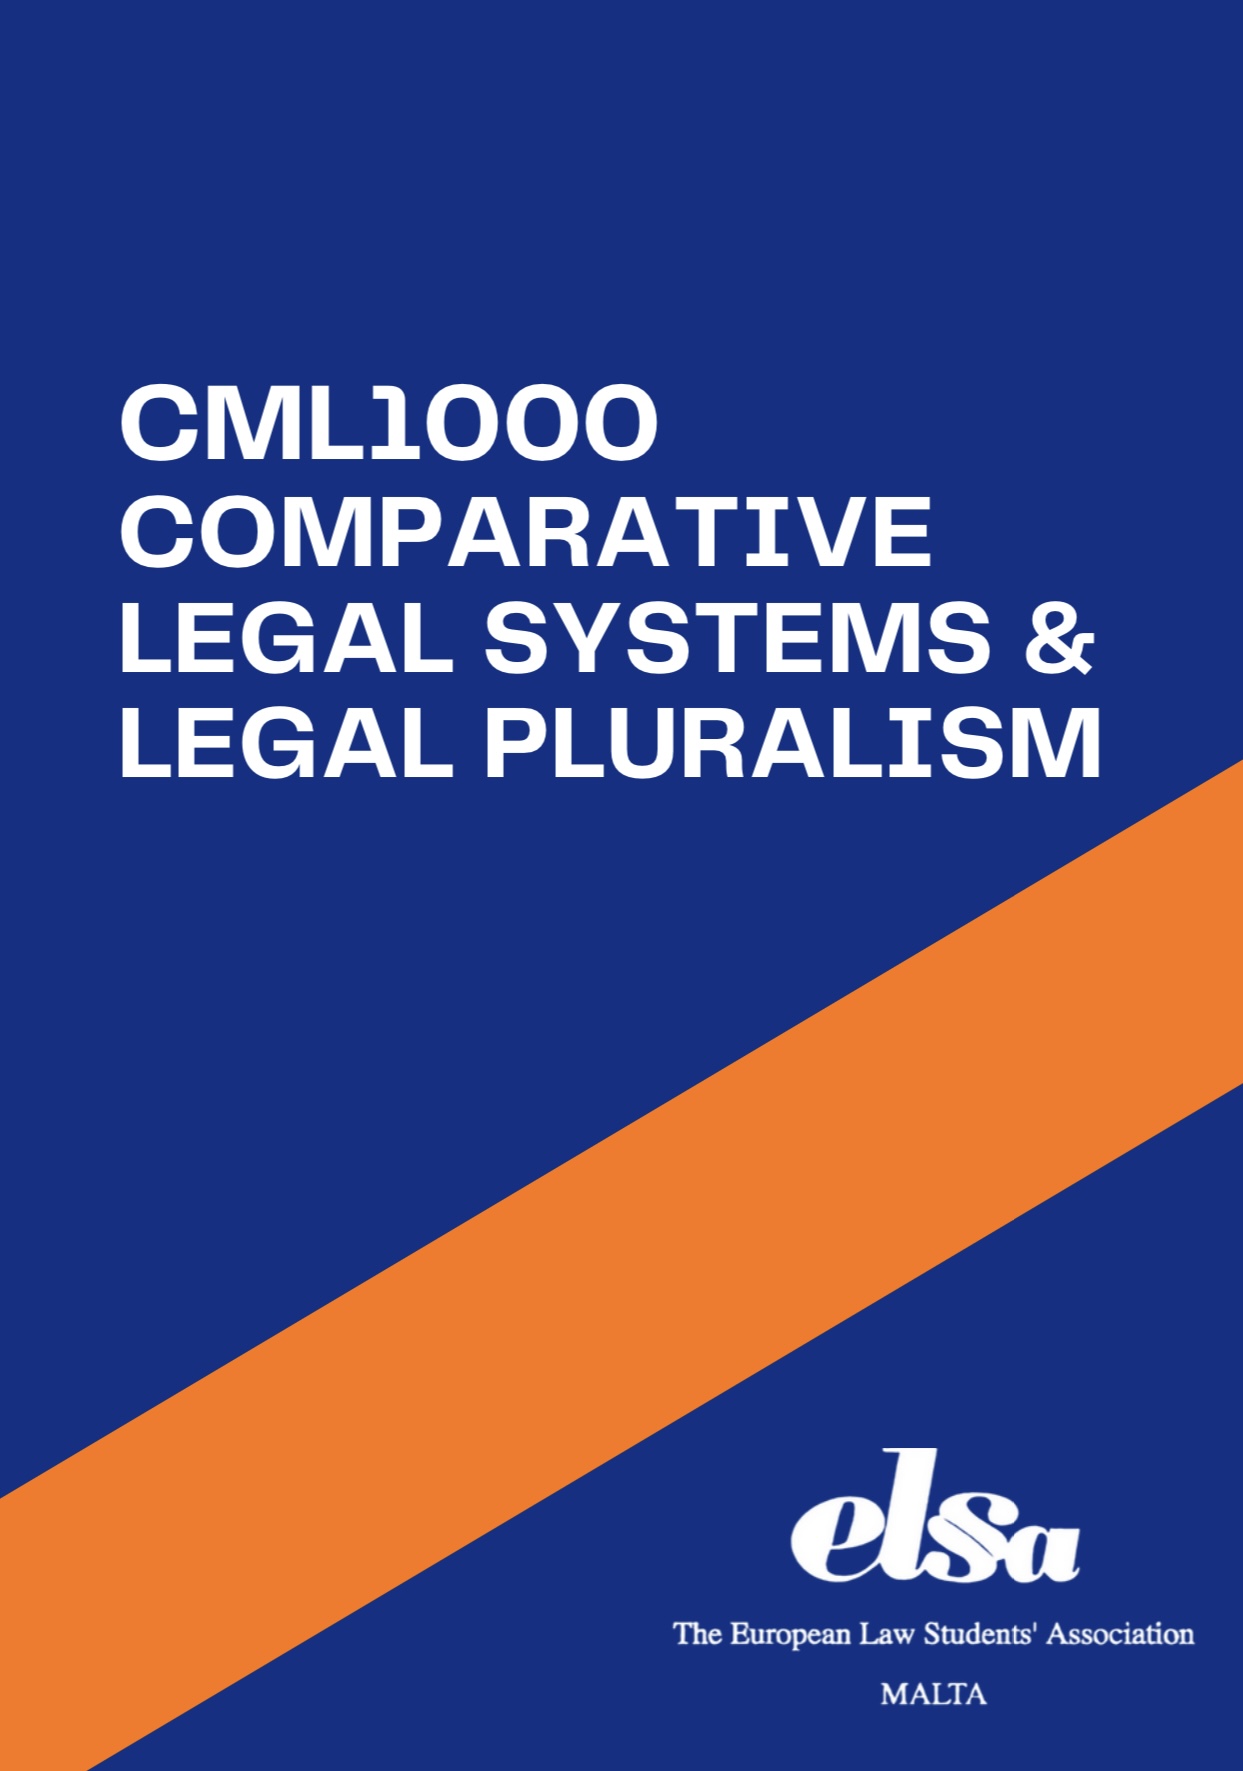 CML1000 - Comparative Legal Systems and Legal Pluralism